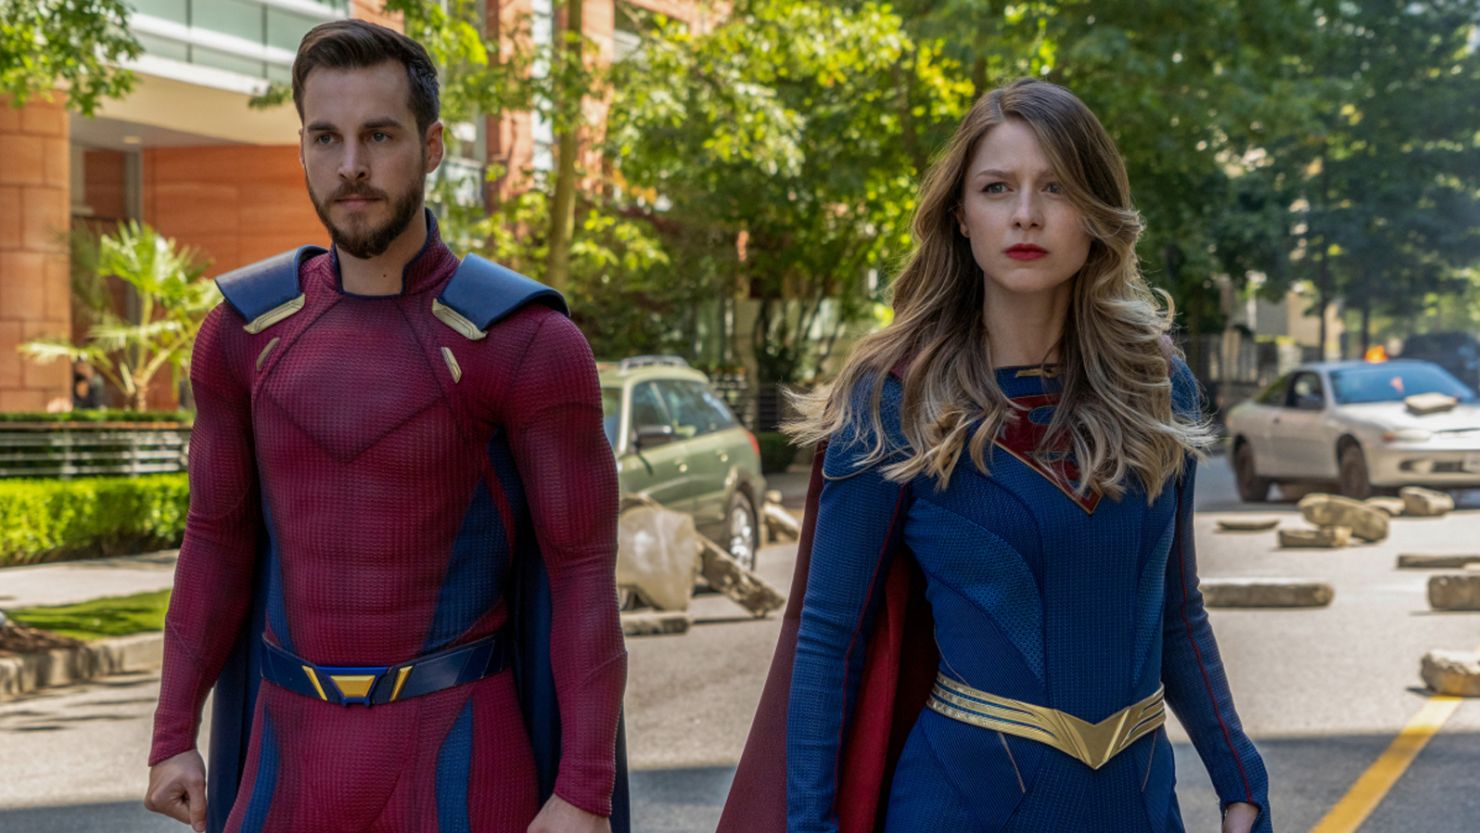 Chris Wood as Mon-El and Melissa Benoist as Supergirl in the 'Supergirl' series finale. (Colin Bentley/The CW).